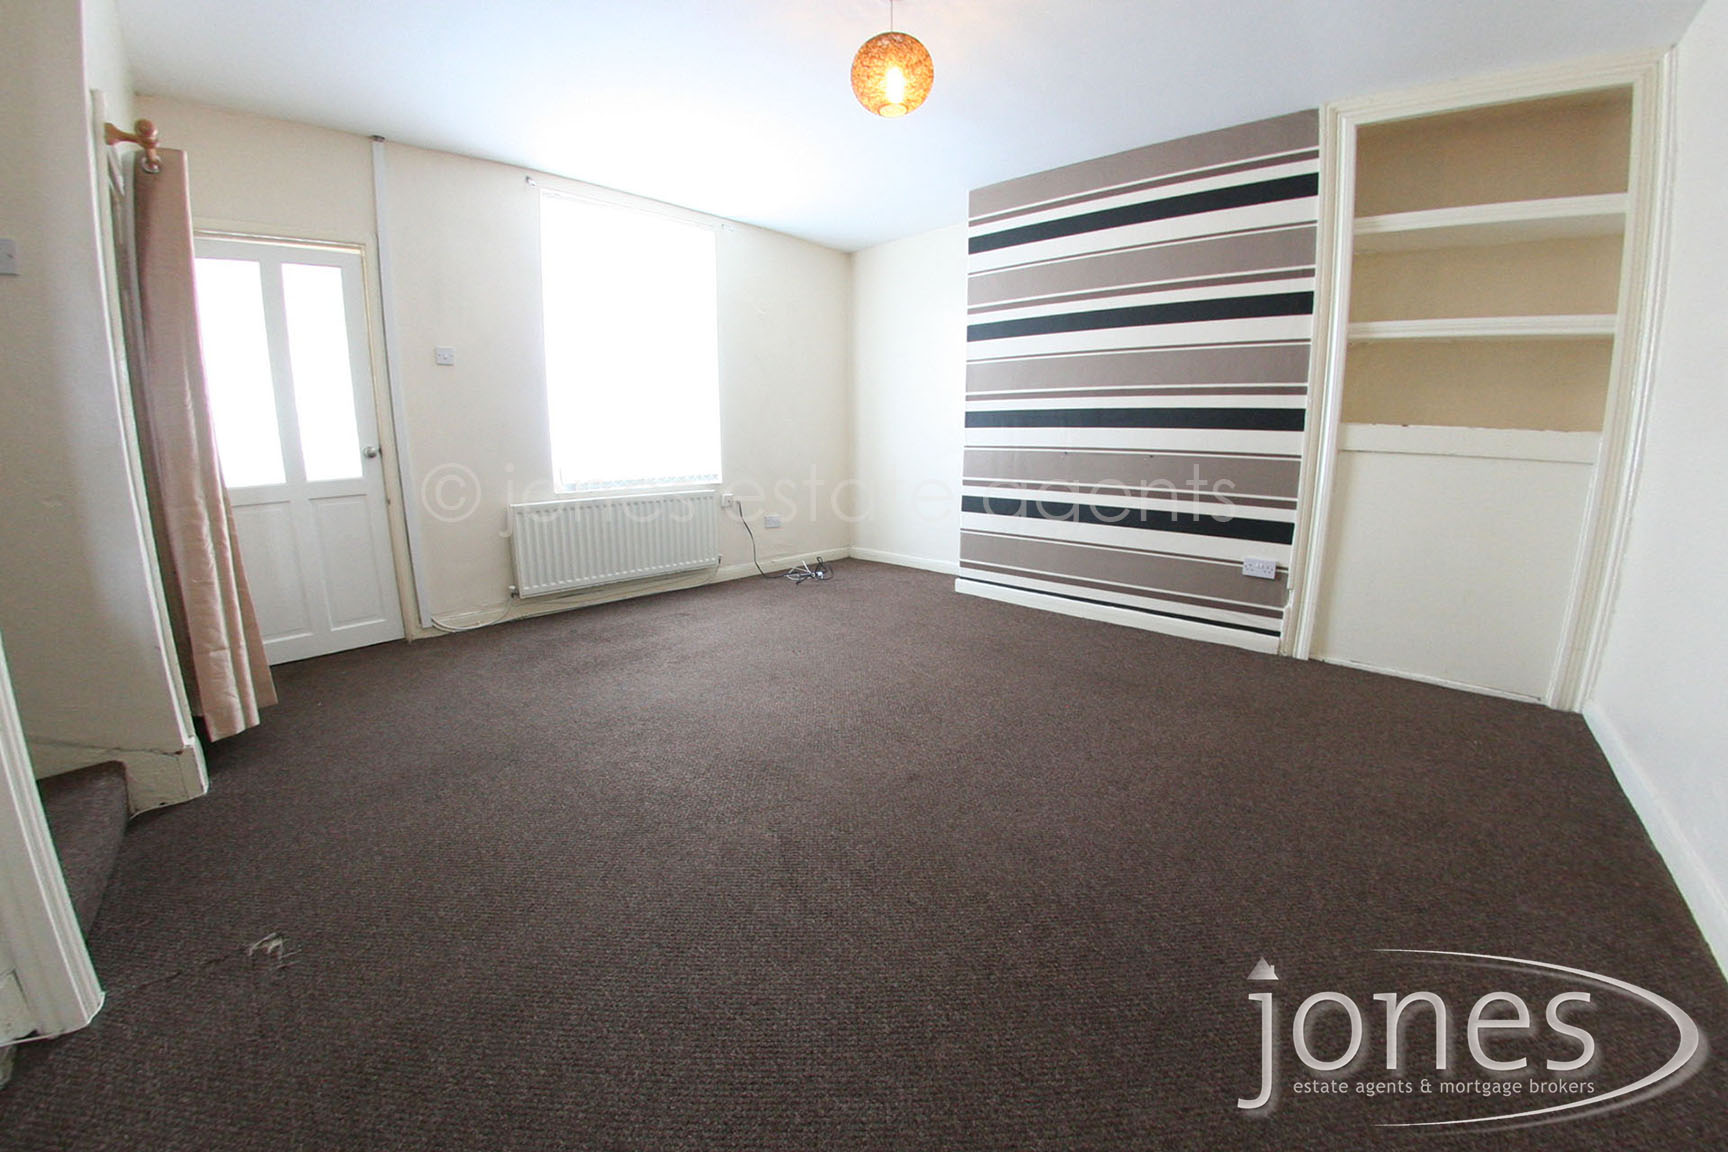 Home for Sale Let - Photo 03 North Road West, Wingate, TS28 5AP